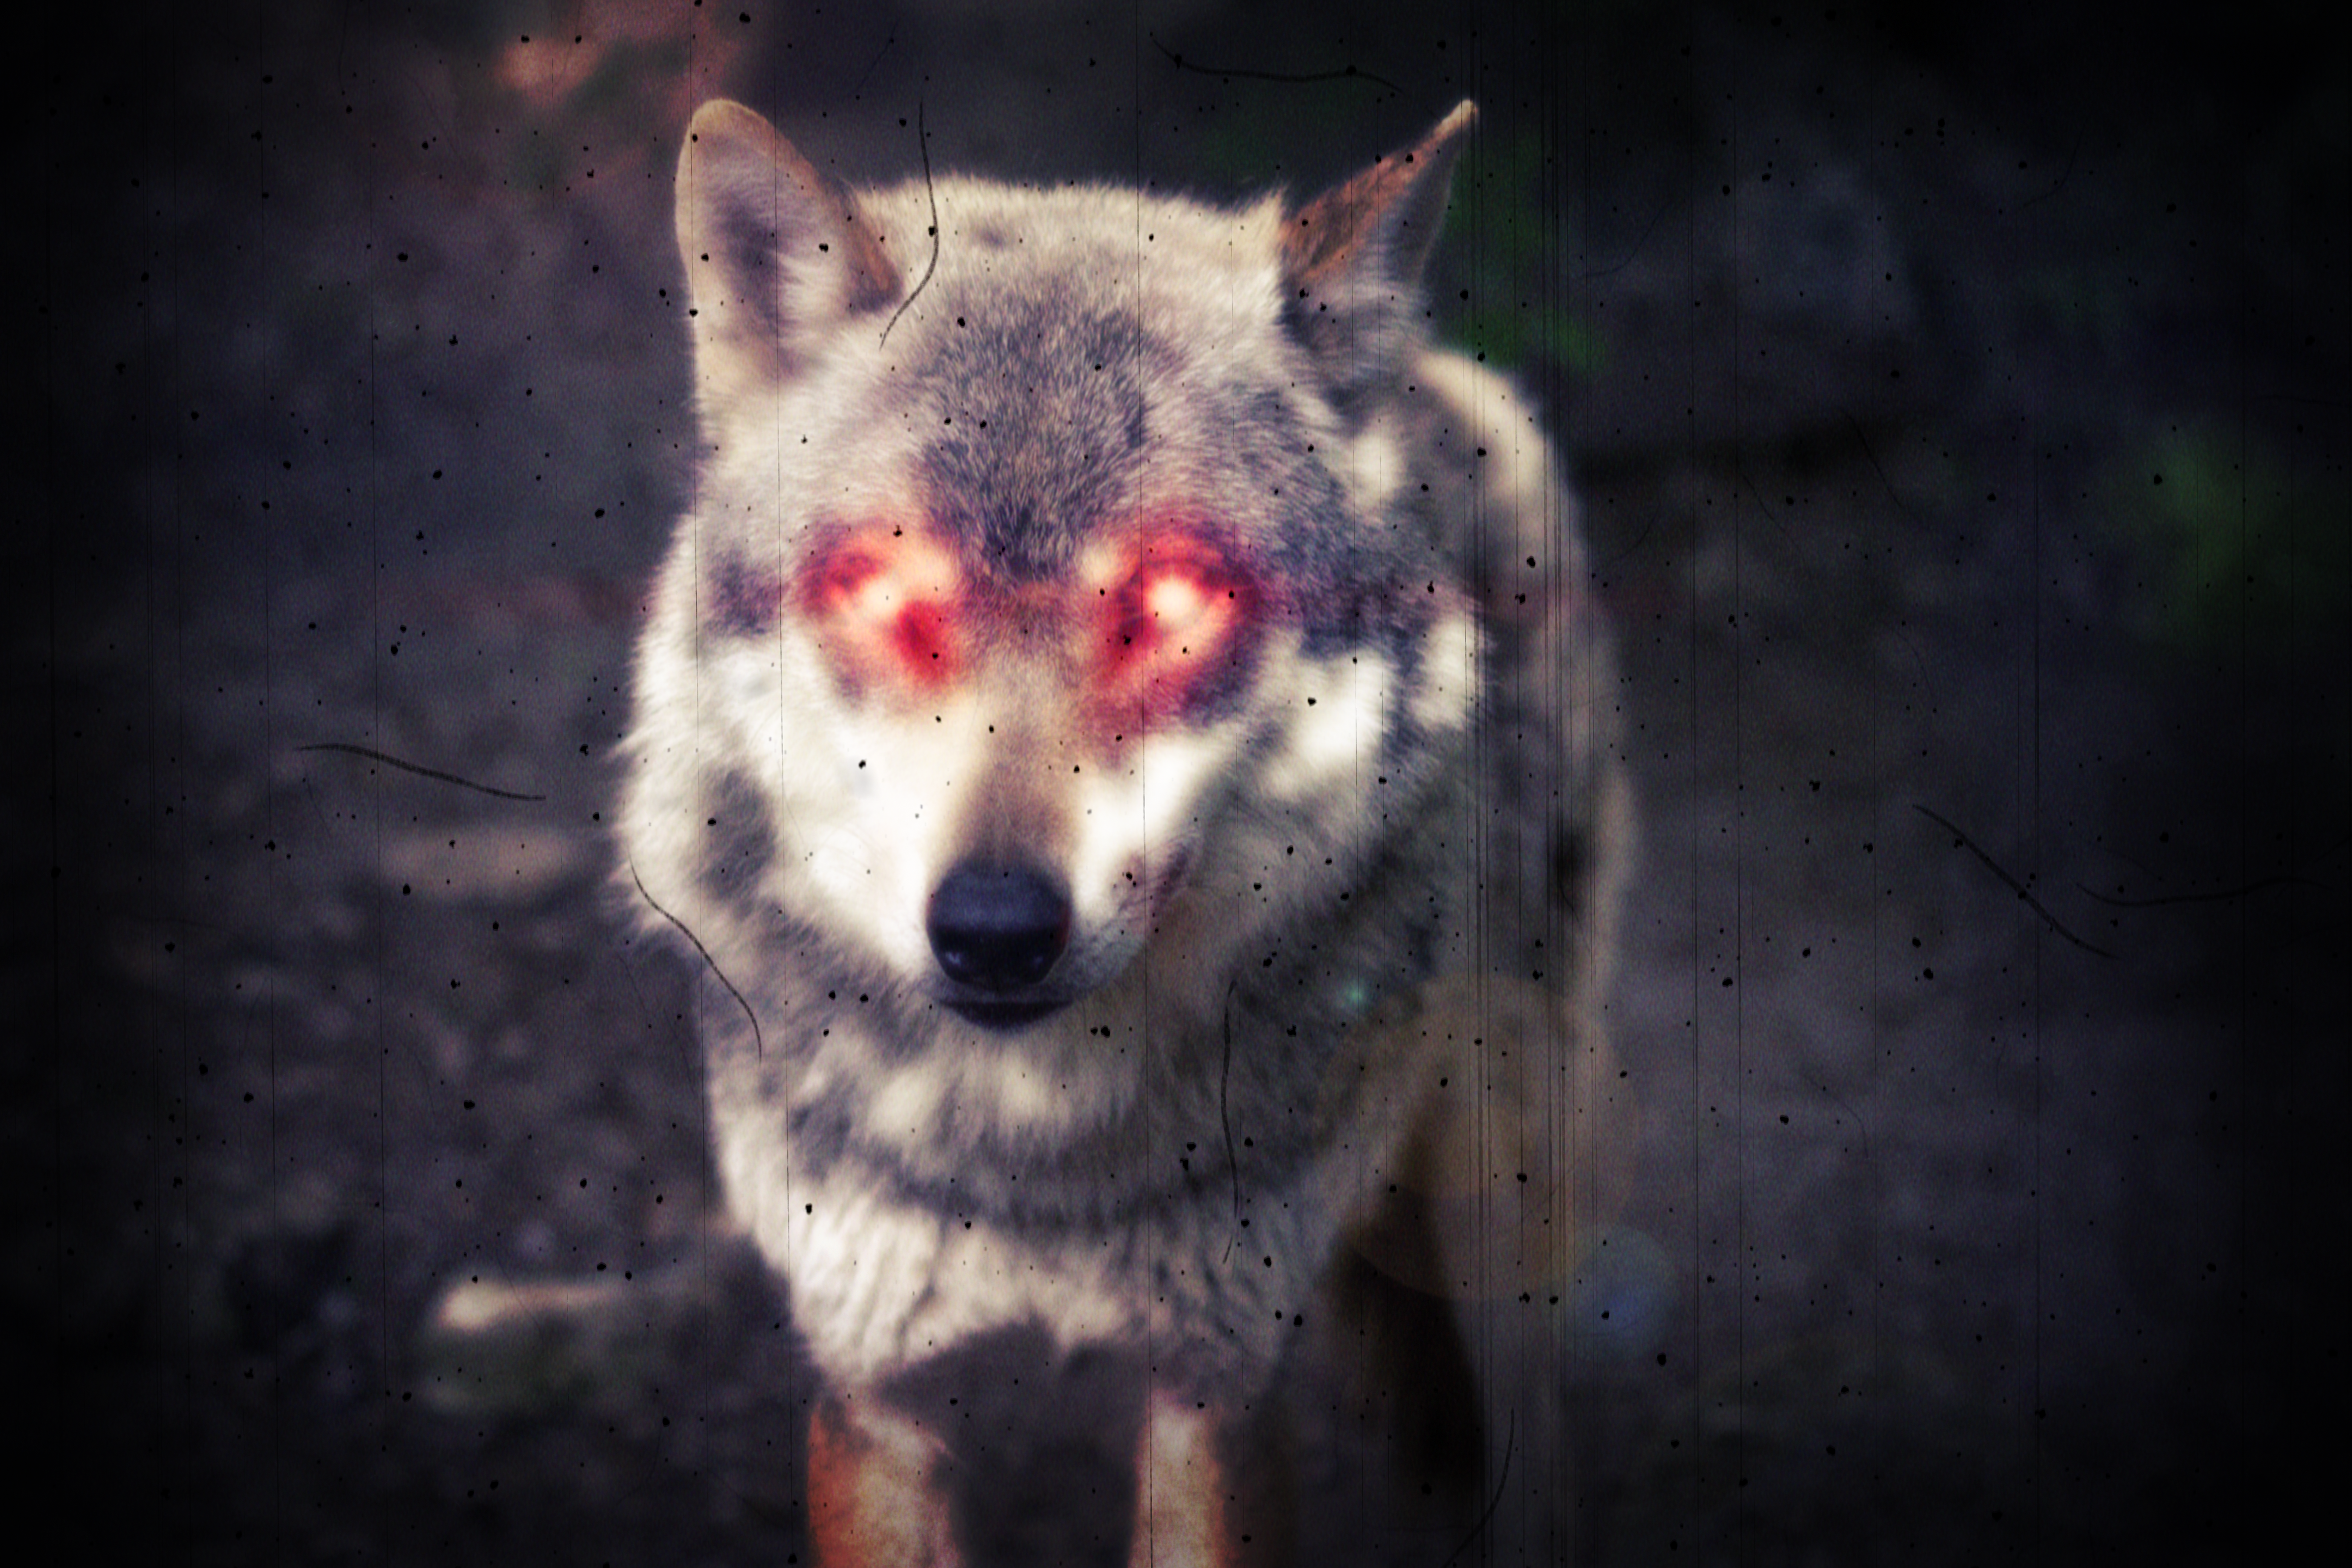 demon_wolf_caucht_on_camera__by_hoover1979-dbfwyu0.png